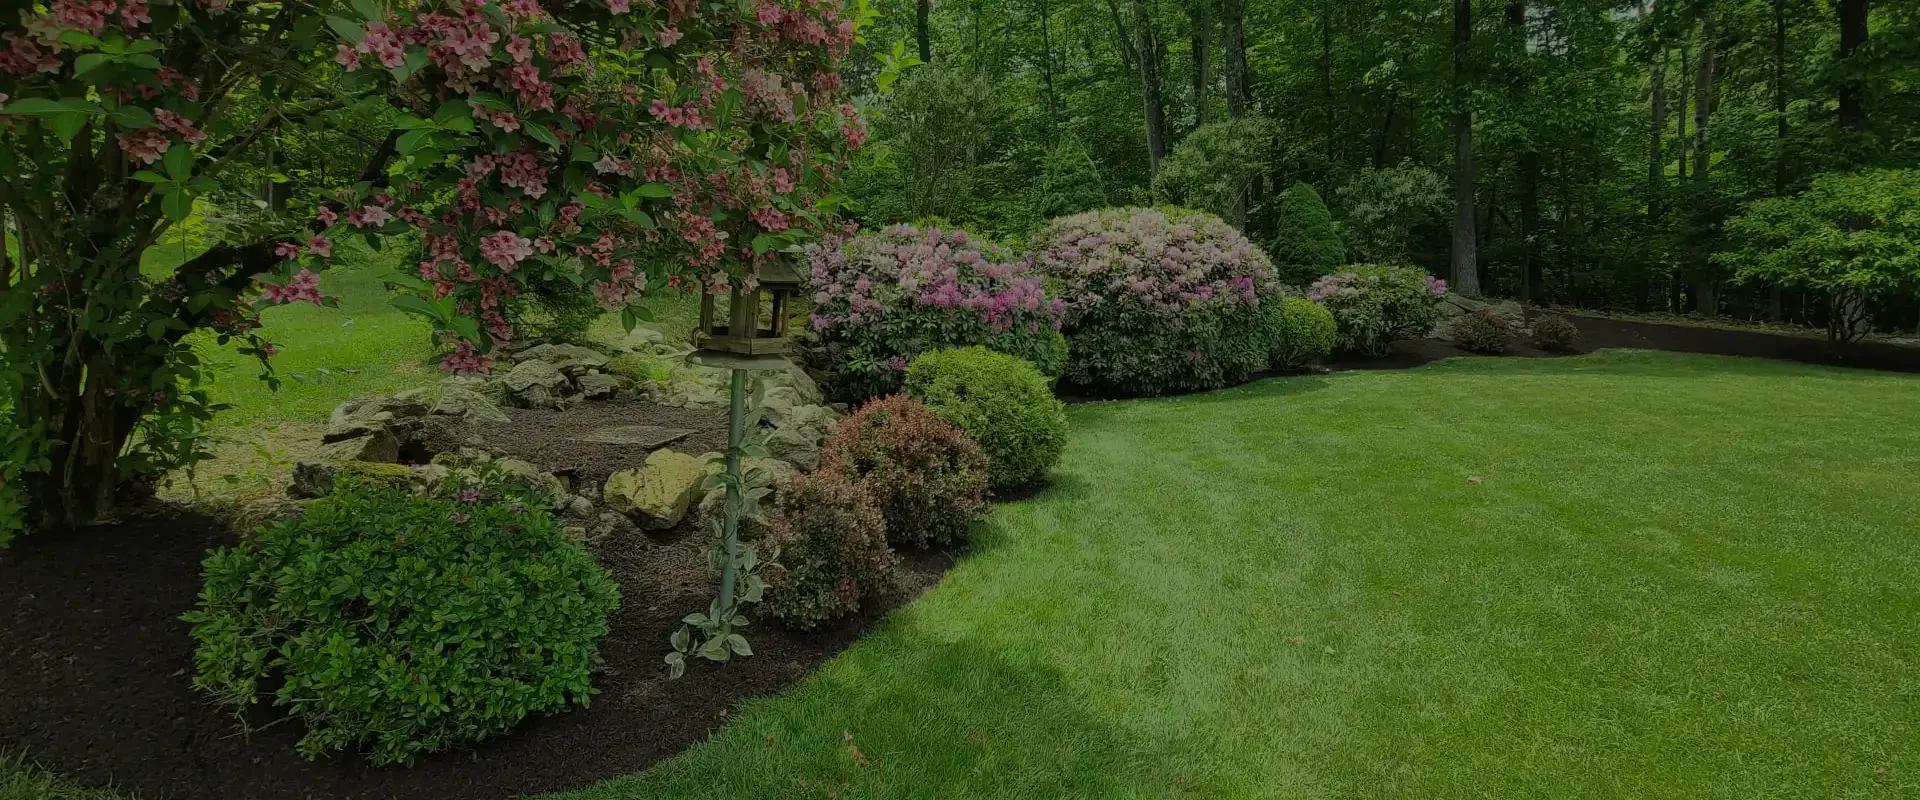 landscape with a pink flower tree some bushes with flowers and trees around and the back danbury ct